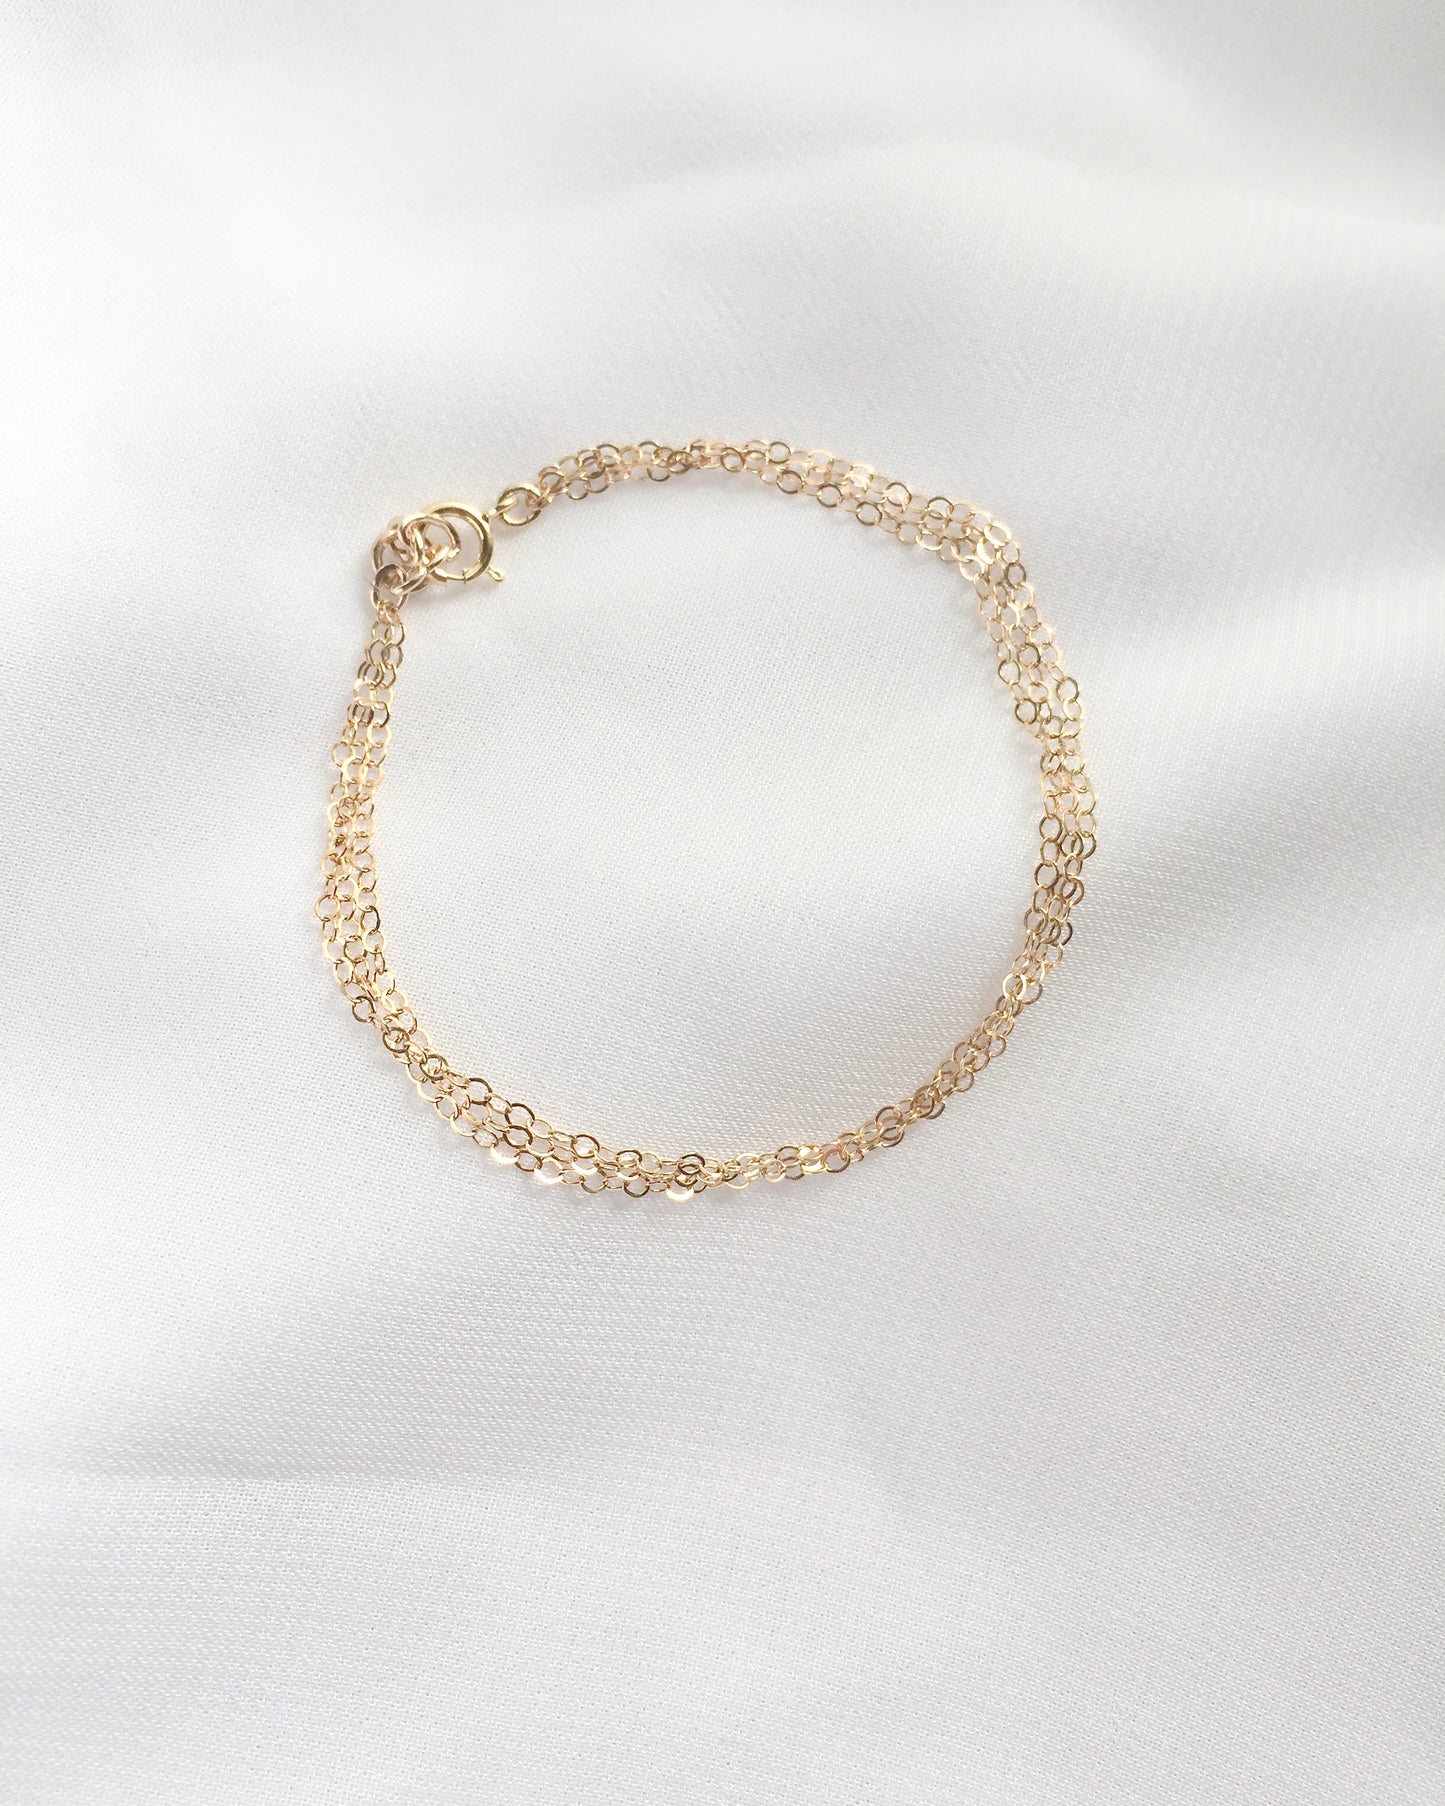 Dainty Layered Chain Bracelet in Gold Filled or Sterling Silver | Delicate Layering Bracelet | IB Jewelry